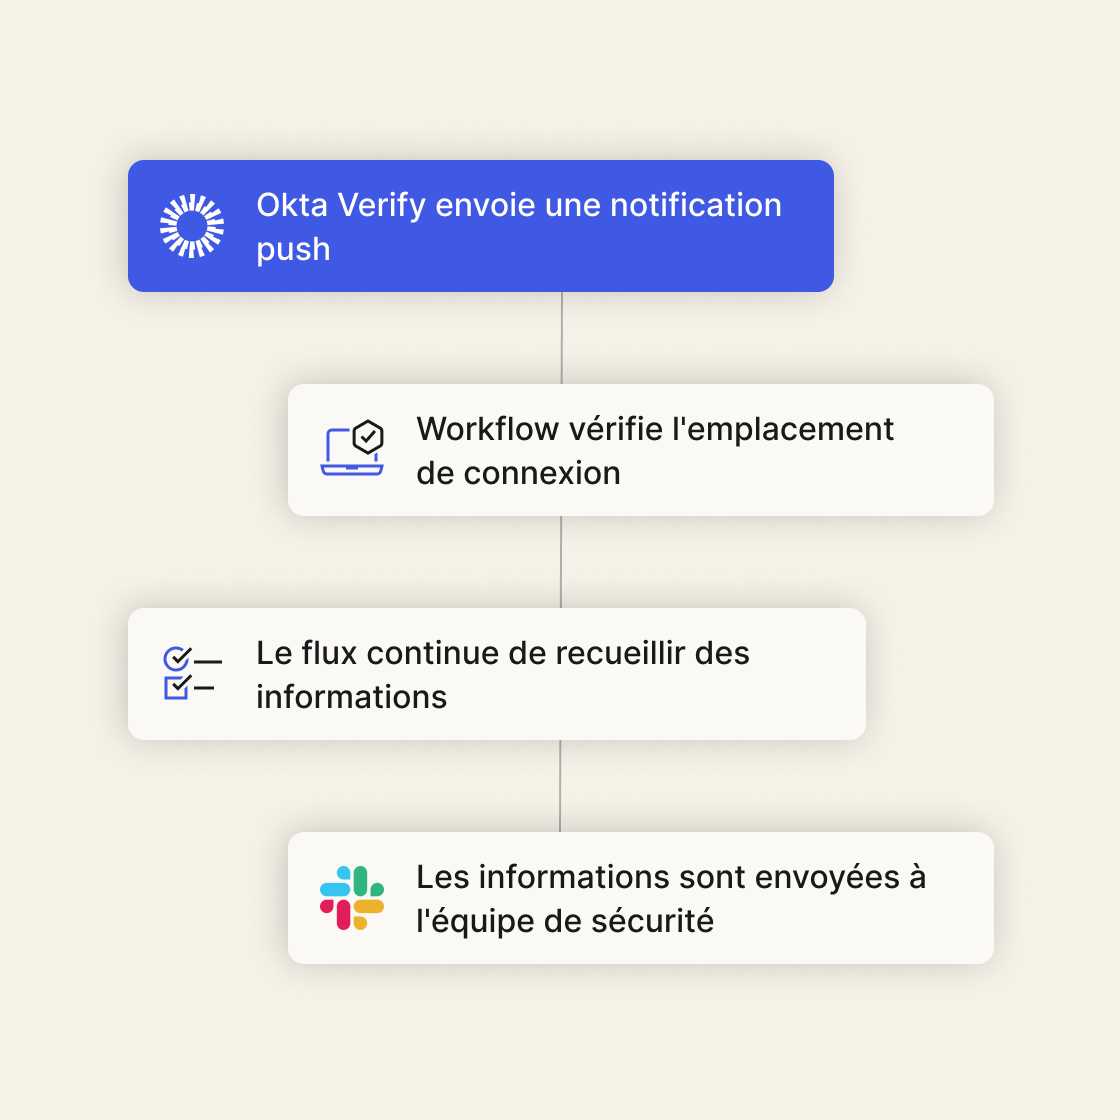 A graphic of a flow starting with a push notification from Okta Verify and information being sent to a security team.